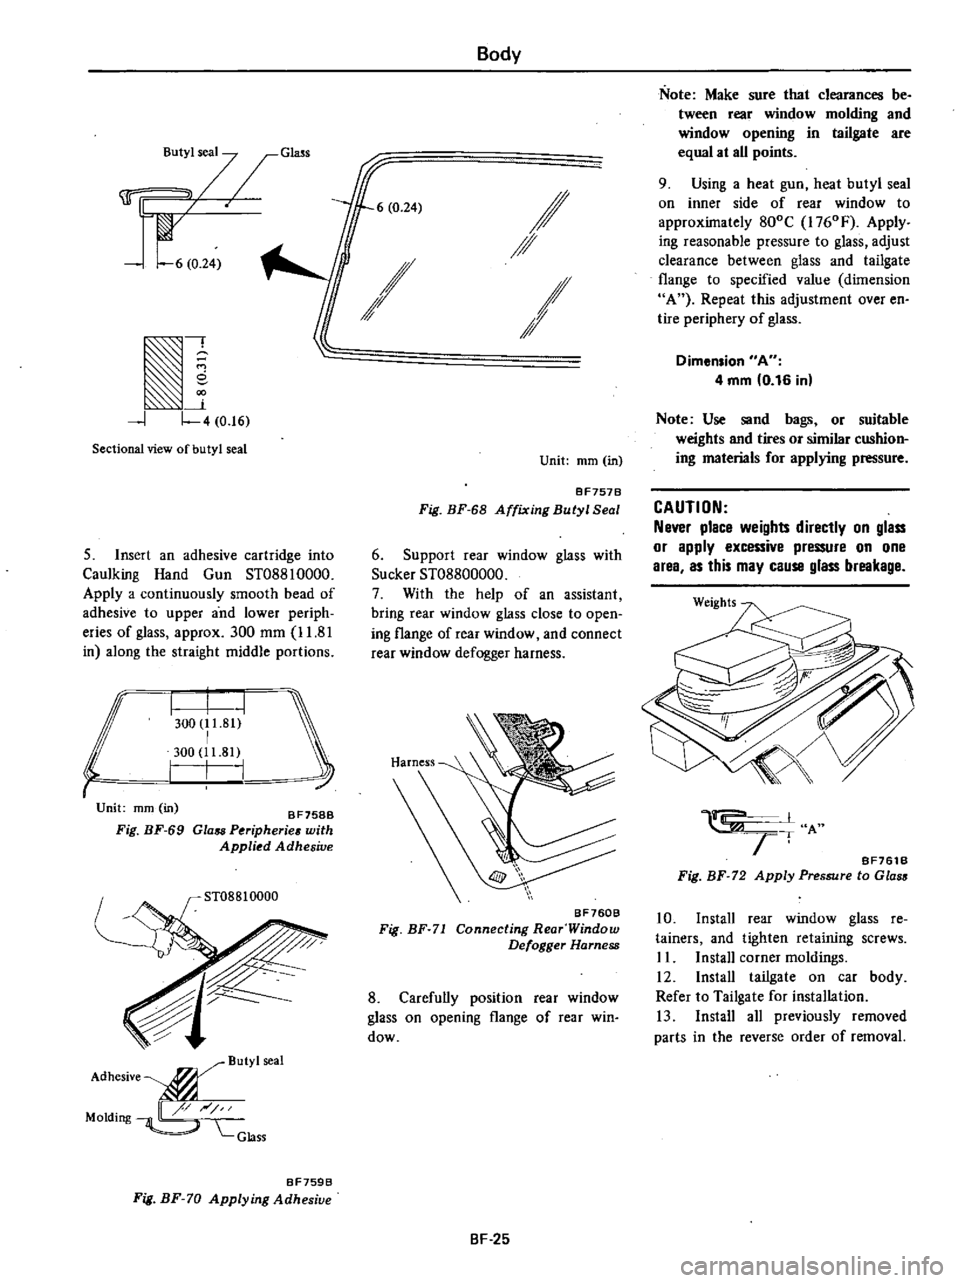 DATSUN 210 1979  Service Manual 
r 
t

s7 
Glm

I

6 
0 
24

k

IJ

4 
0 
16

Sectional 
view

of

butyl 
seal

5 
Insert 
an 
adhesive

cartridge 
into

Caulking 
Hand 
Gun

ST08810000

Apply 
a

continuously 
smooth 
bead 
of

adh